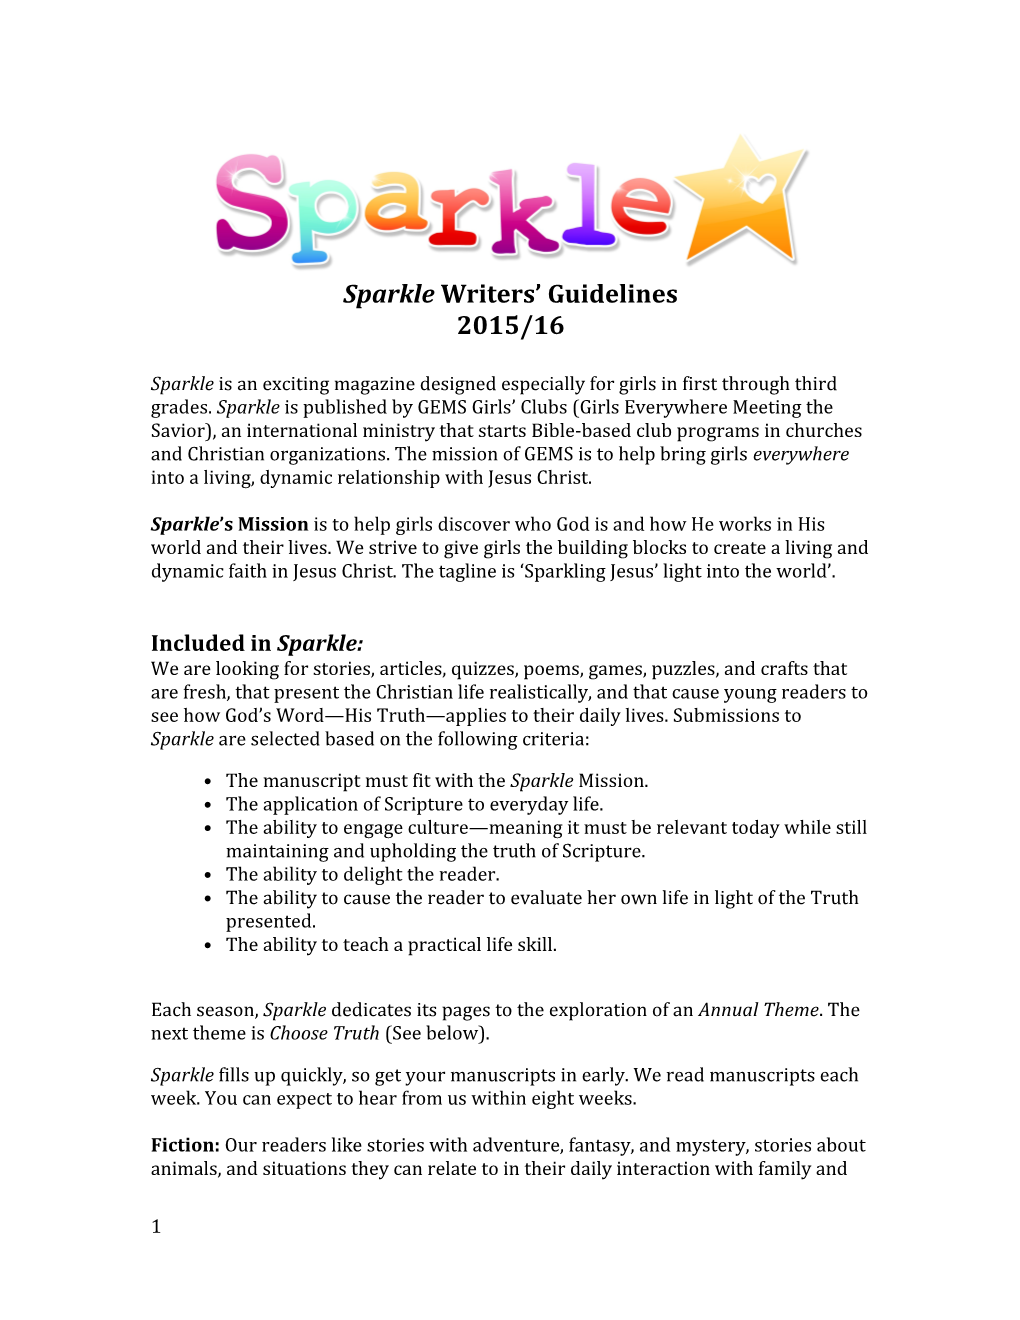 Sparkle Writers Guidelines